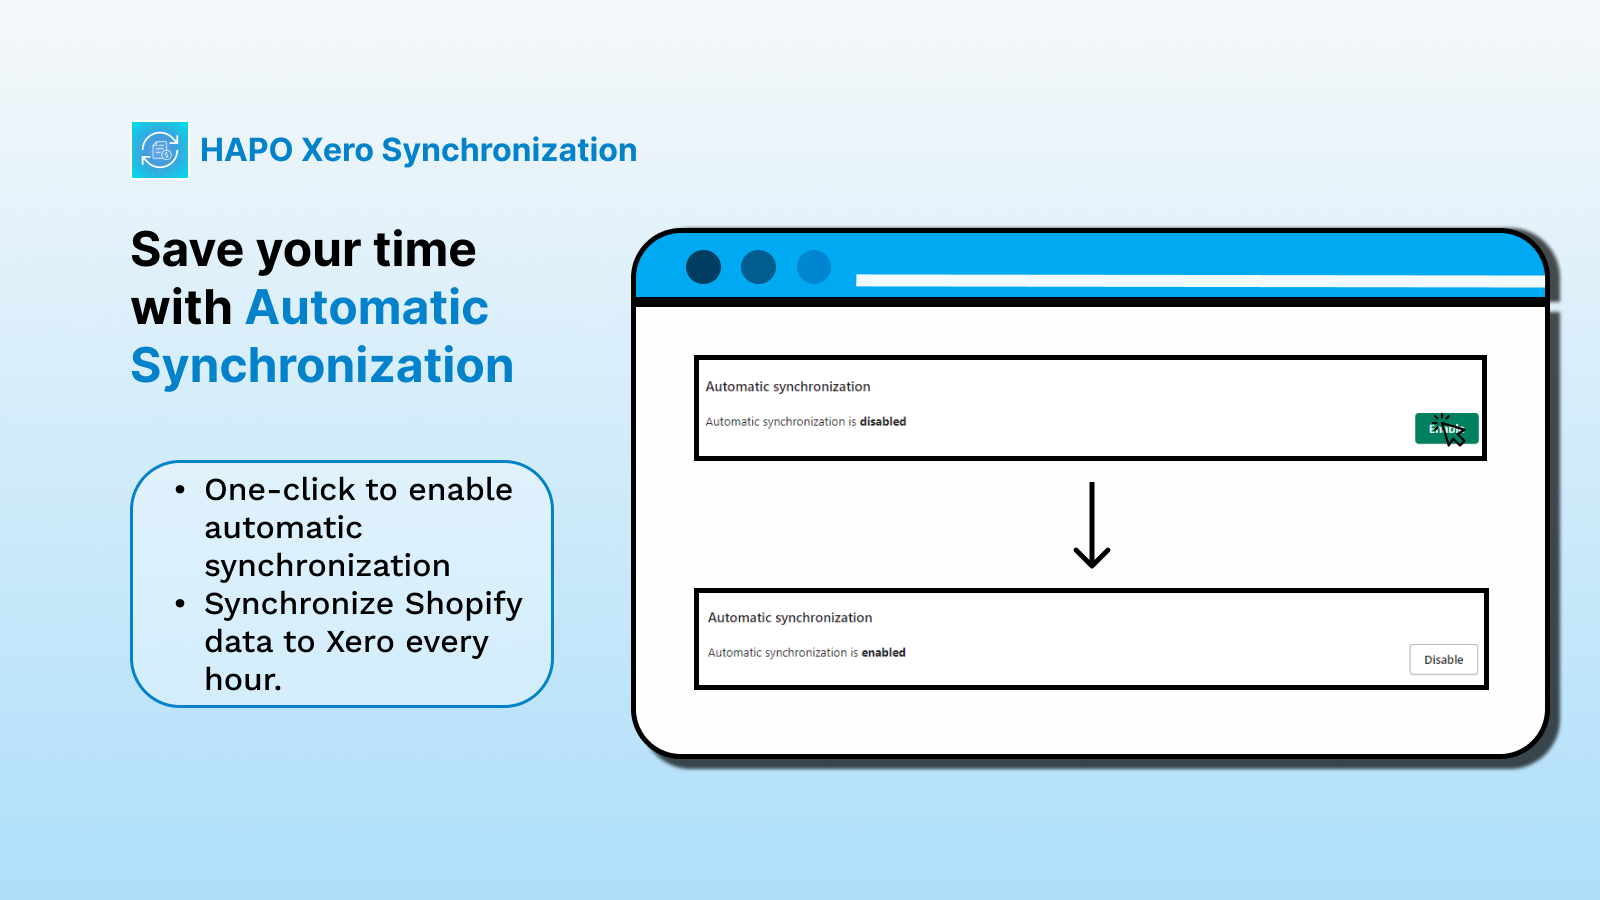 Save your time with Automatically Synchronization.